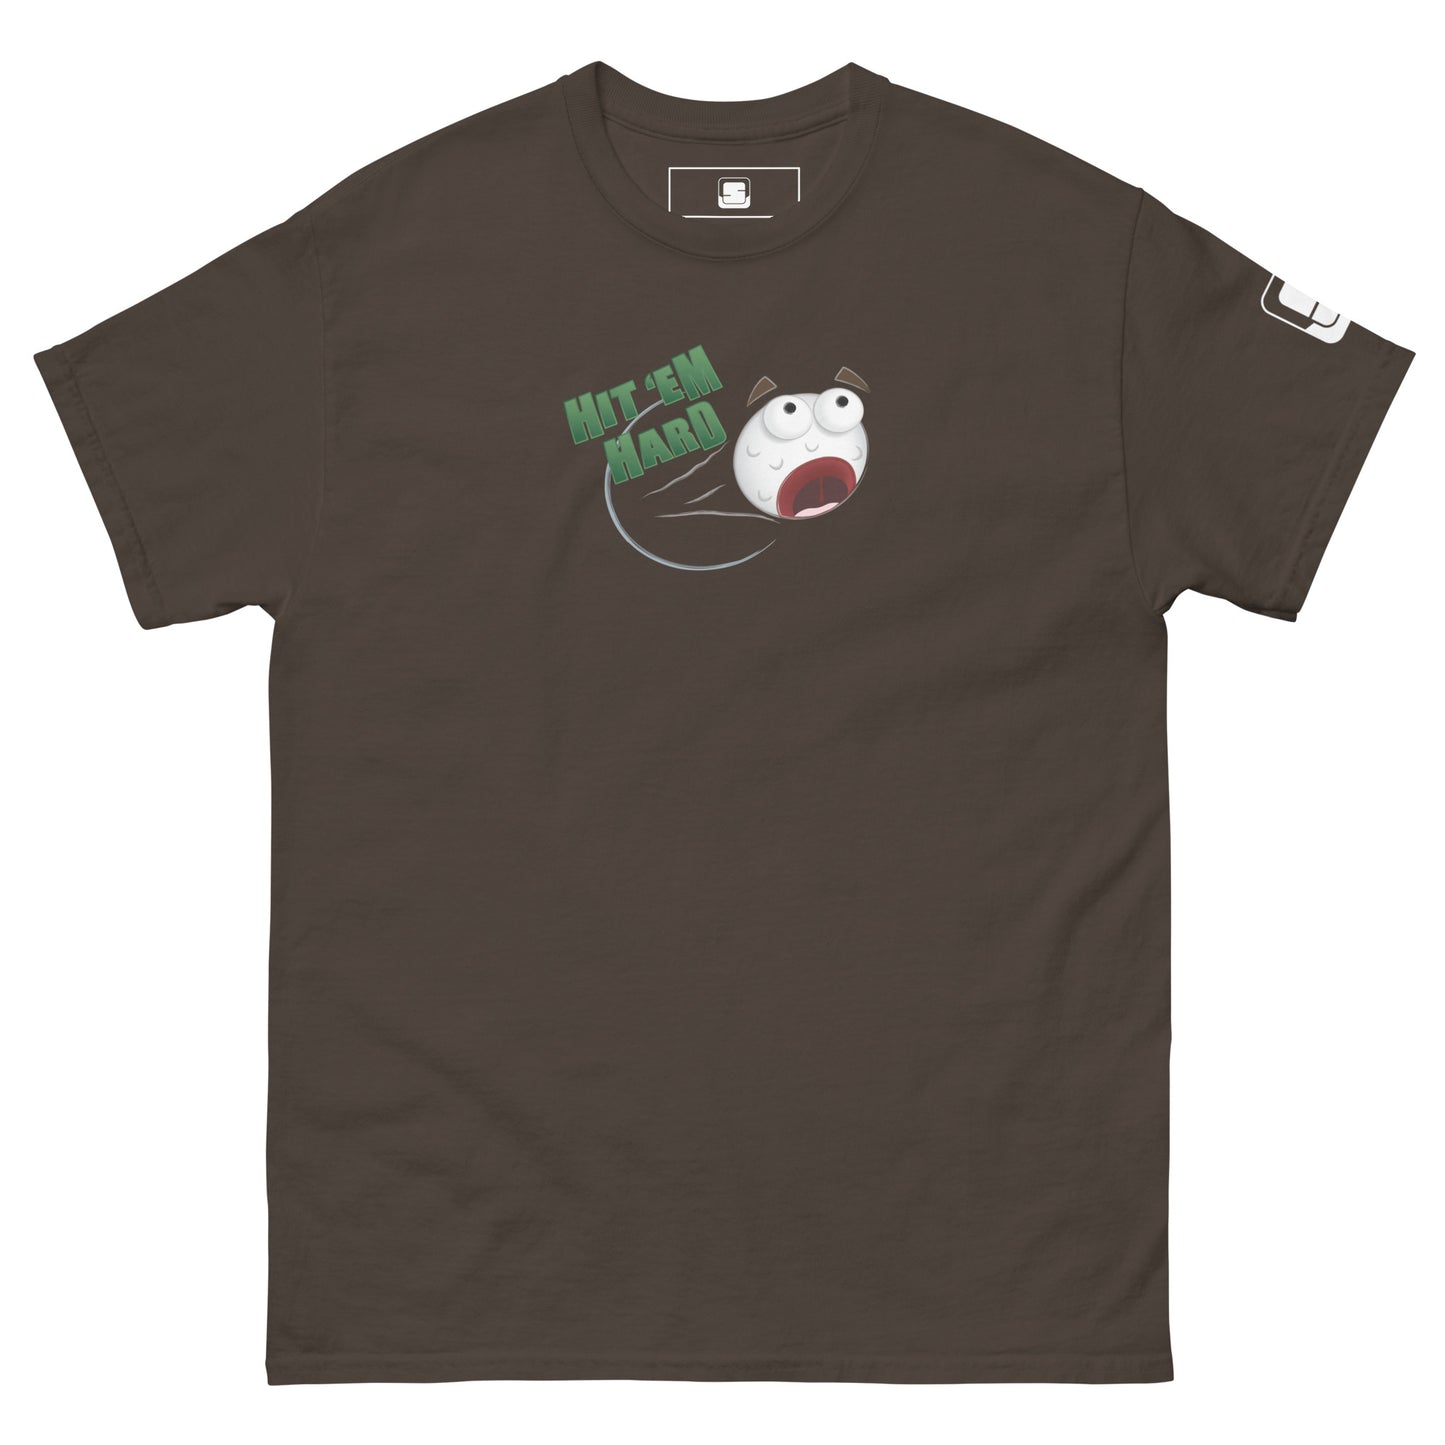  A chocolate brown t-shirt is laid flat, featuring a colorful graphic in the center. The graphic depicts a distressed cartoon golf ball with wide eyes and an open mouth, flying through the air. Above the golf ball, the phrase "HIT 'EM HARD" is printed in bold, green letters. The golf ball leaves a streak behind it, emphasizing its high speed. The right sleeve has a small white logo patch. The bold graphic stands out against the black background, creating a fun and energetic design.